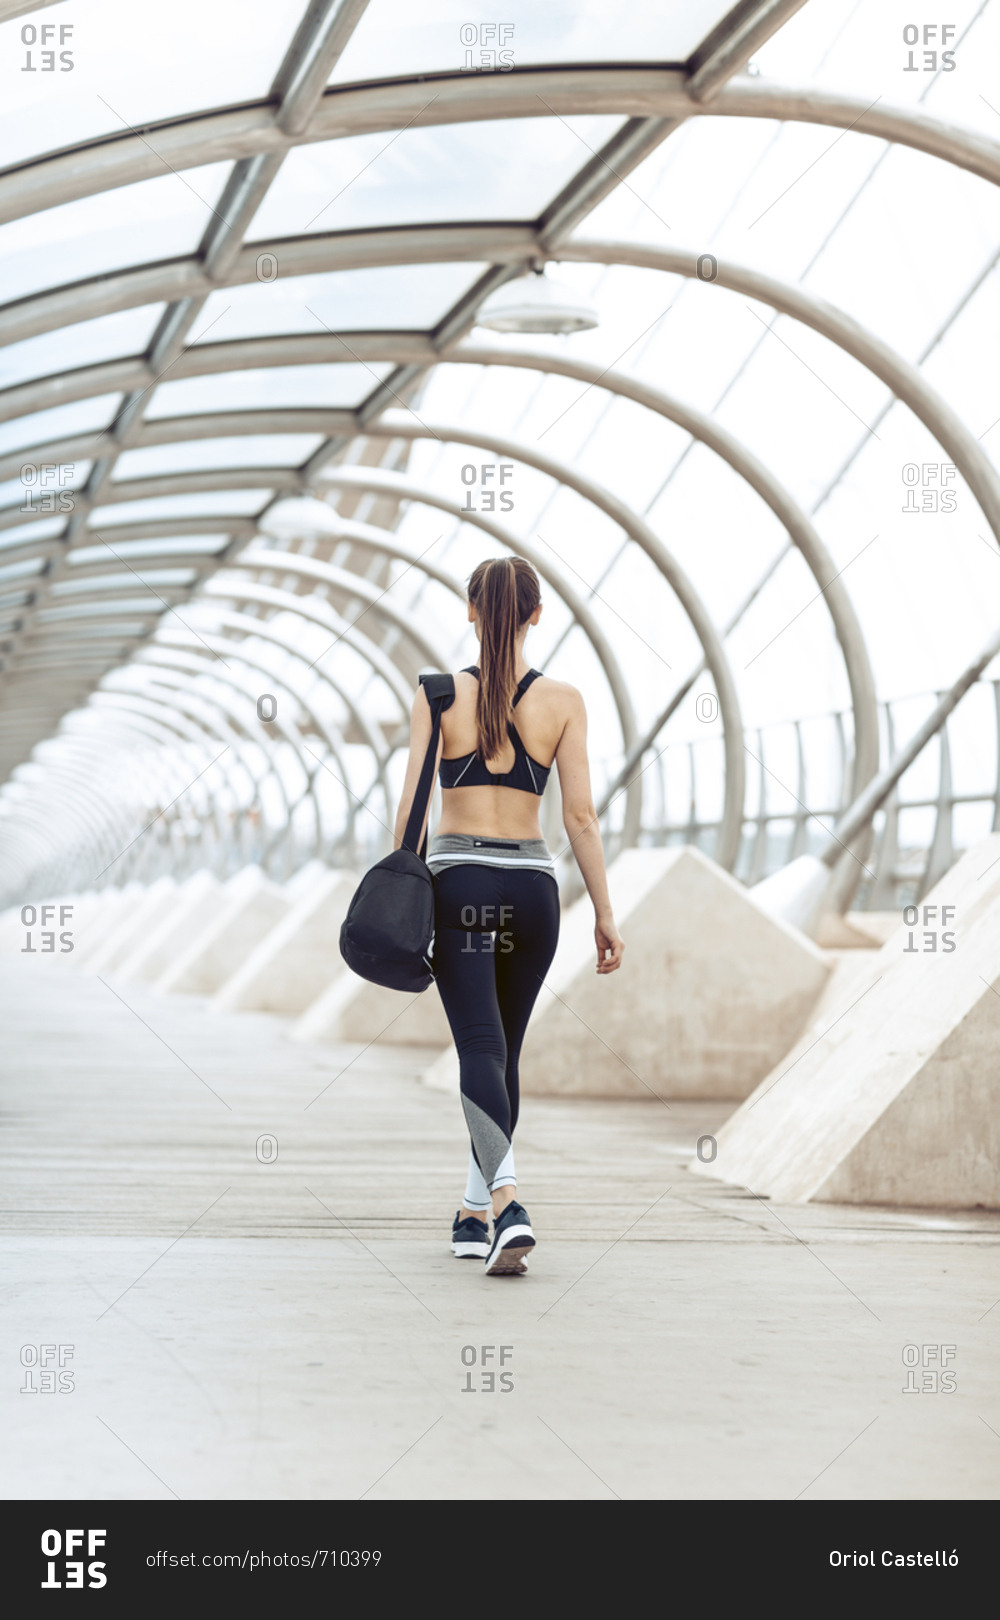 Rearview of athletic woman in sportswear carrying gym bag heading to workout